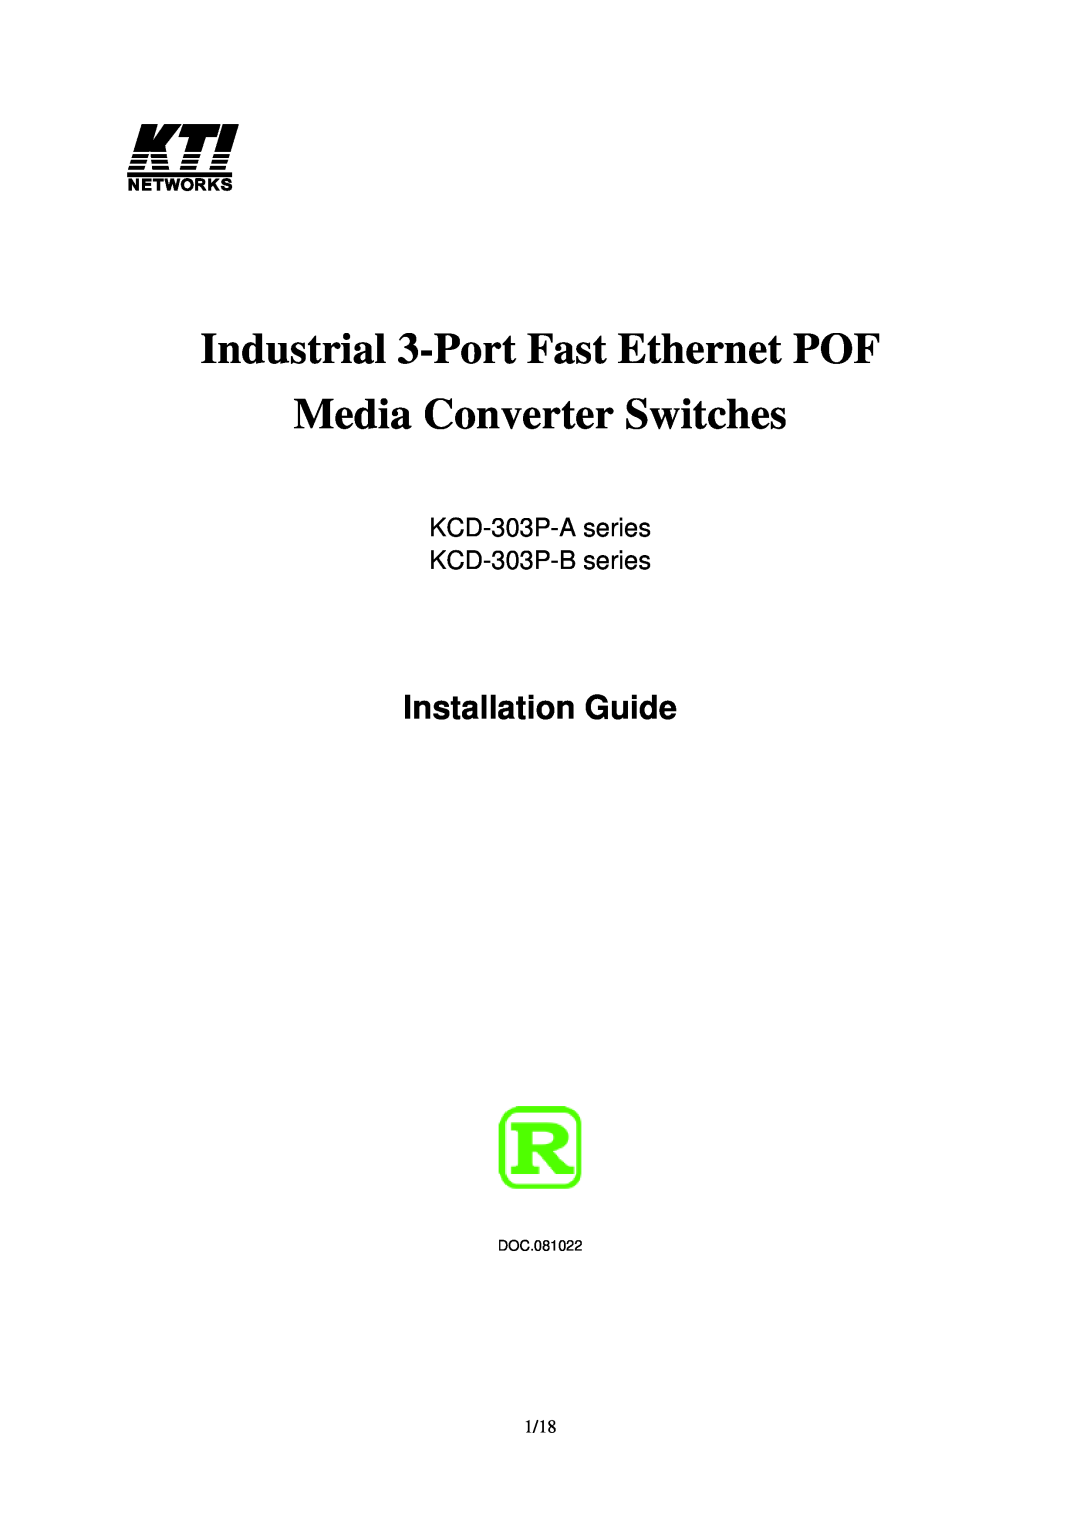 KTI Networks KCD-303P-A2 manual Installation Guide, Industrial 3-Port Fast Ethernet POF, Media Converter Switches, 1/18 